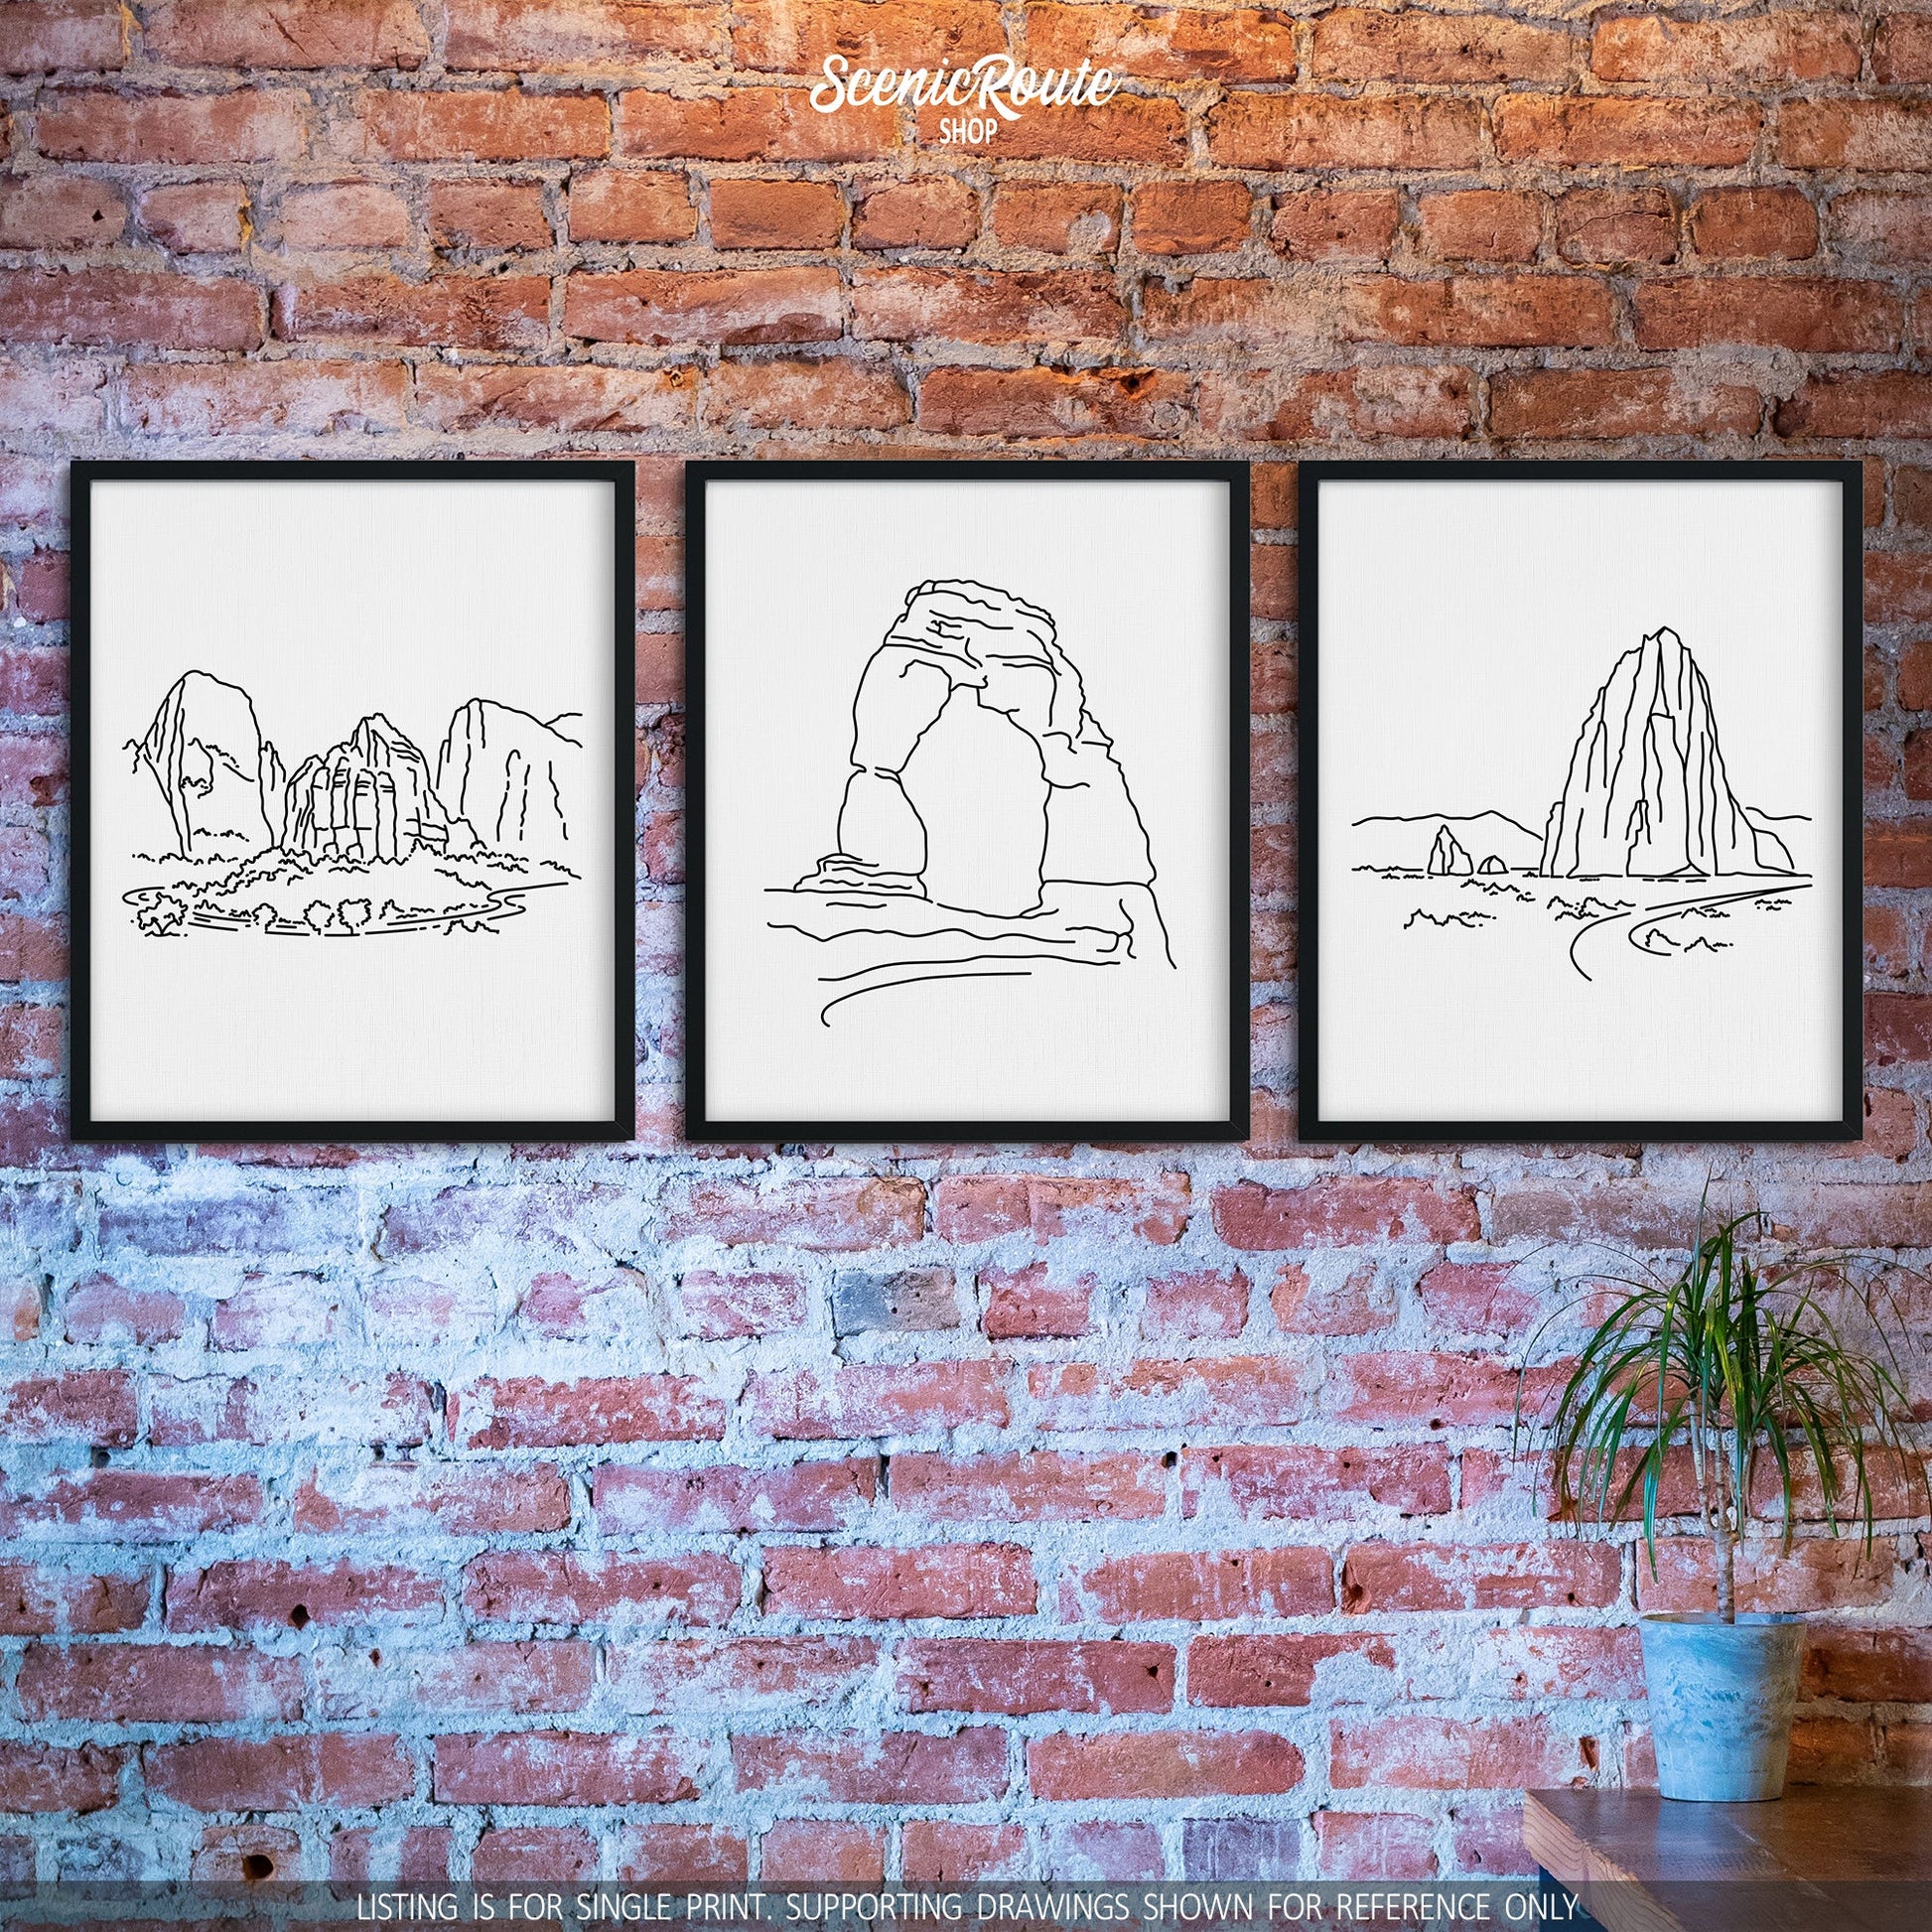 A group of three framed drawings on a brick wall. The line art drawings include Zion National Park, Arches National Park, and Capitol Reef National Park